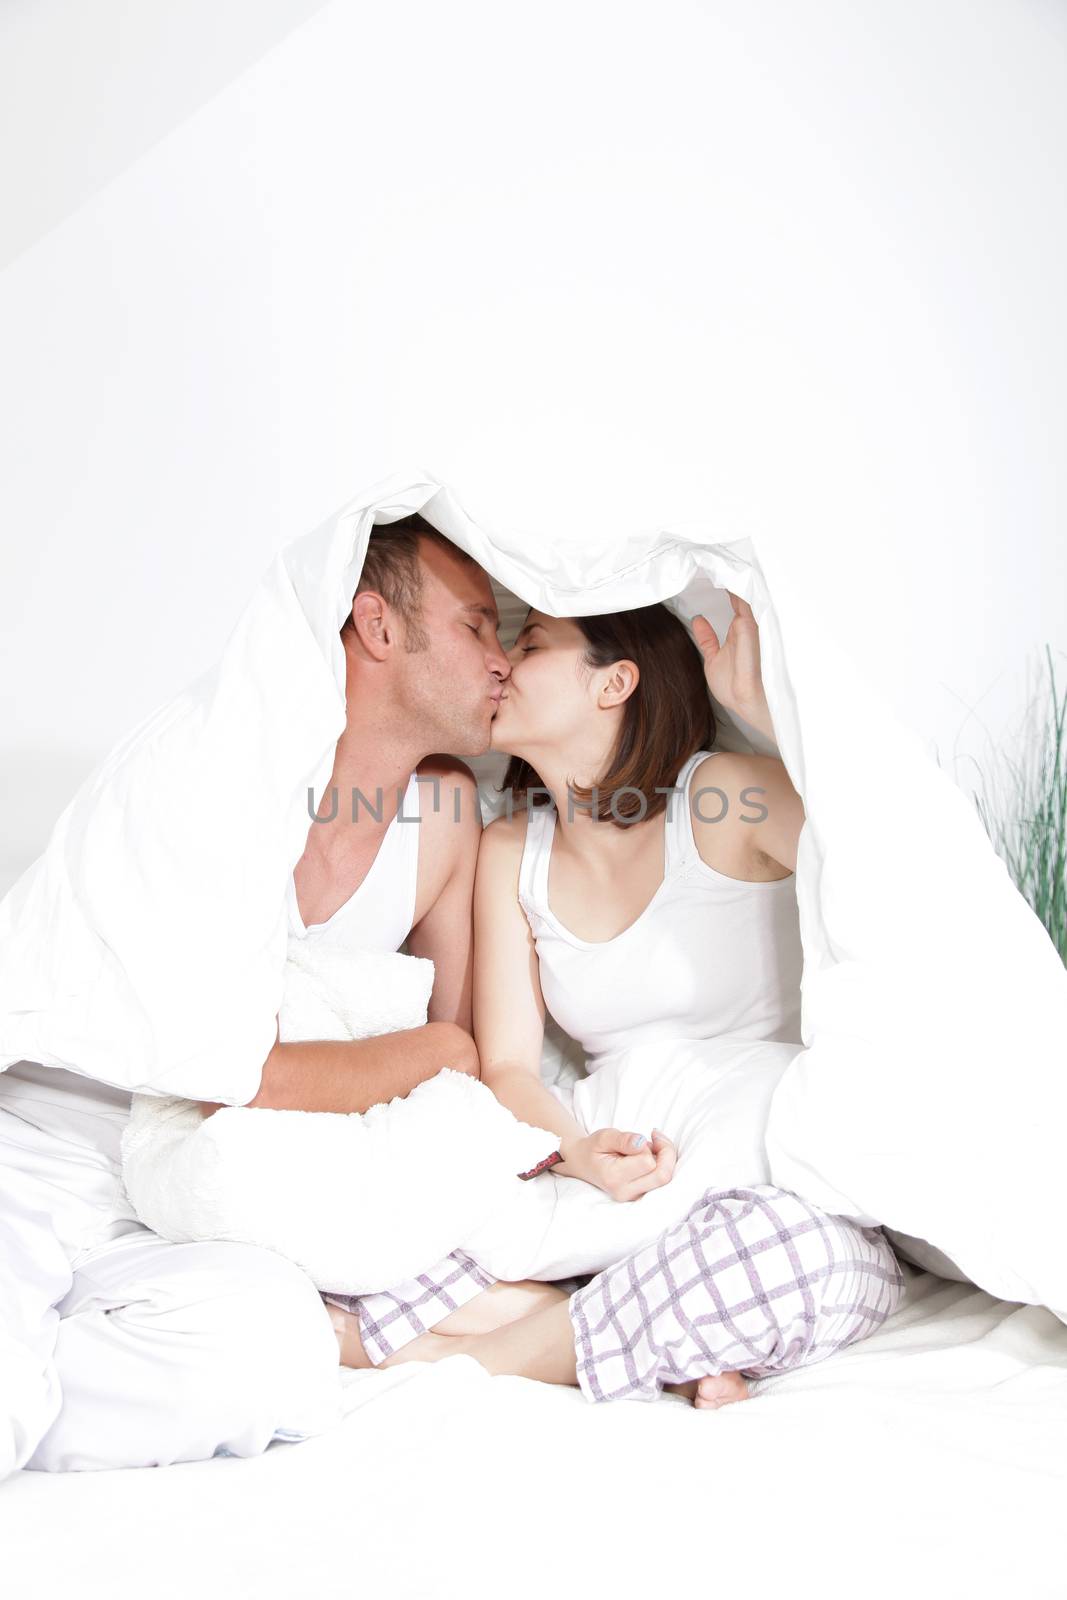 Romantic young couple sitting on the bed kissing under the bedclothes with the duvet over their heads